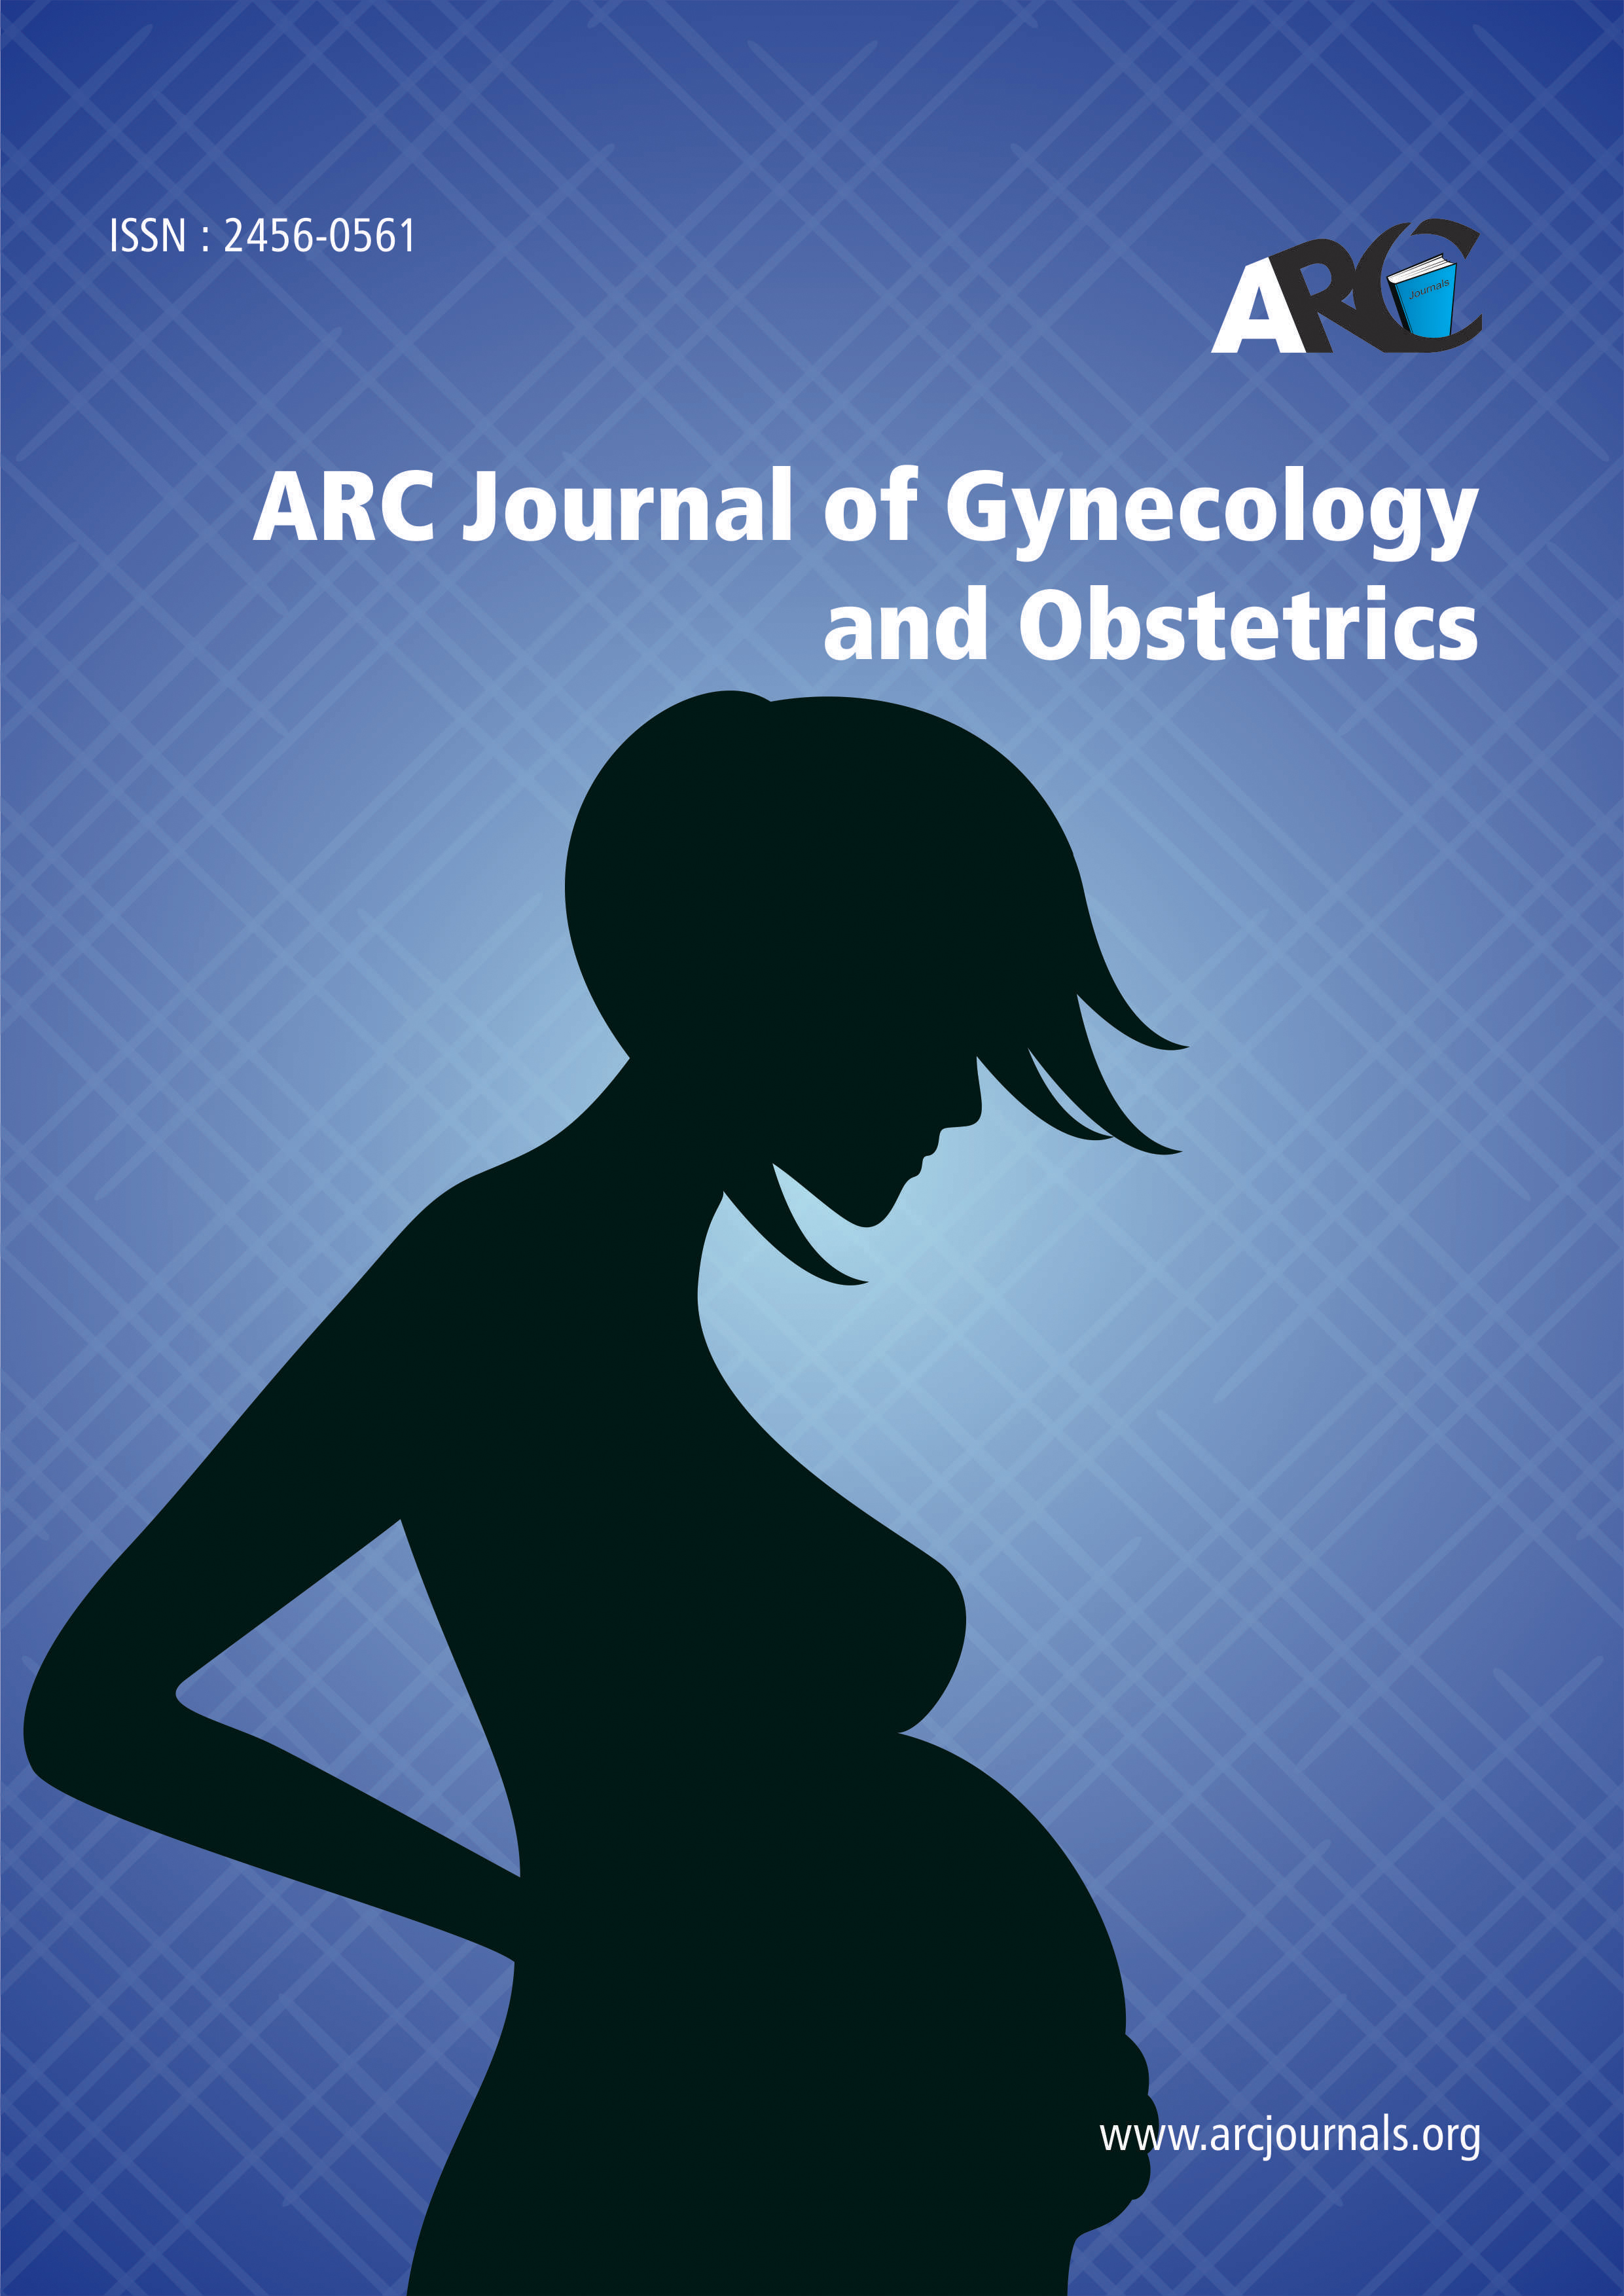 research topics in obstetrics and gynaecology